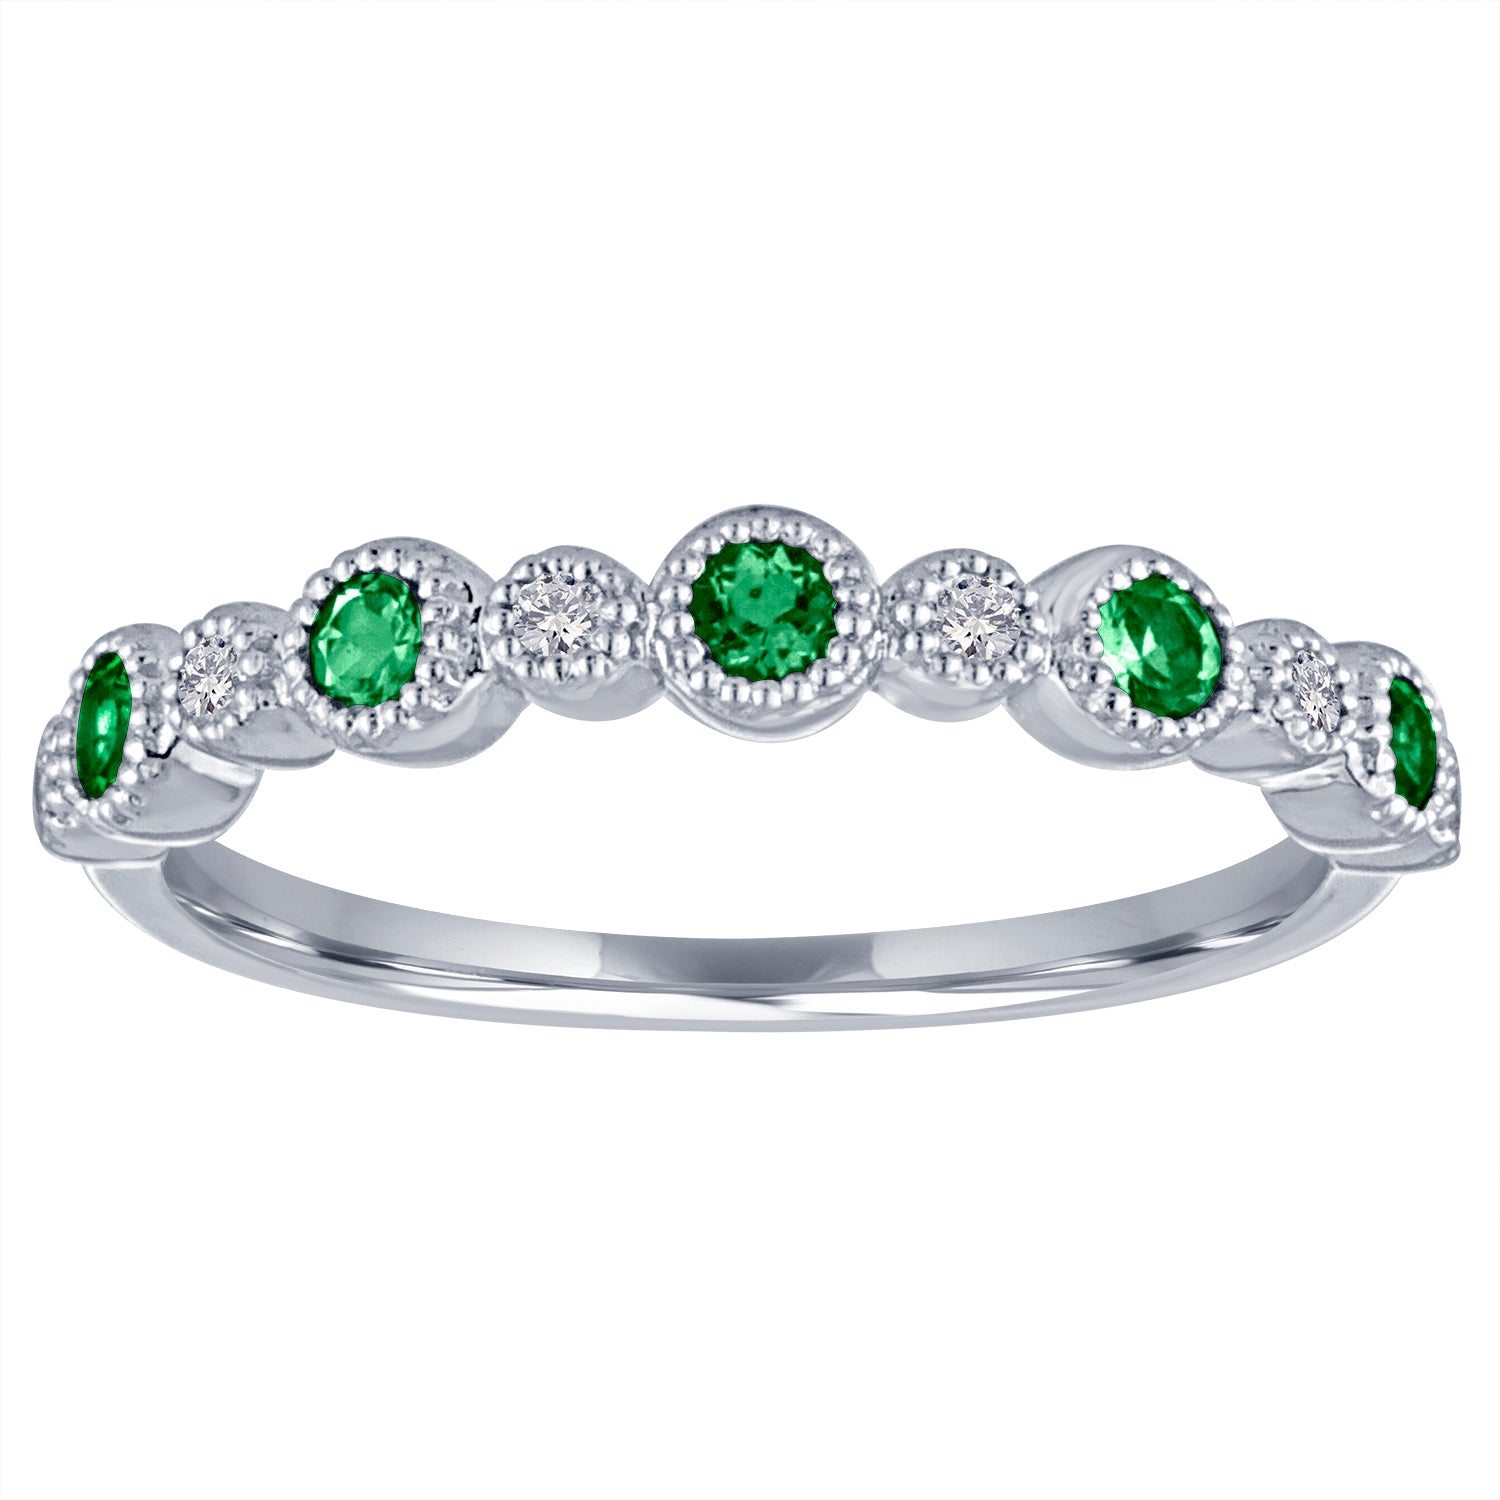 White gold skinny band with large round emeralds and small round diamonds. 